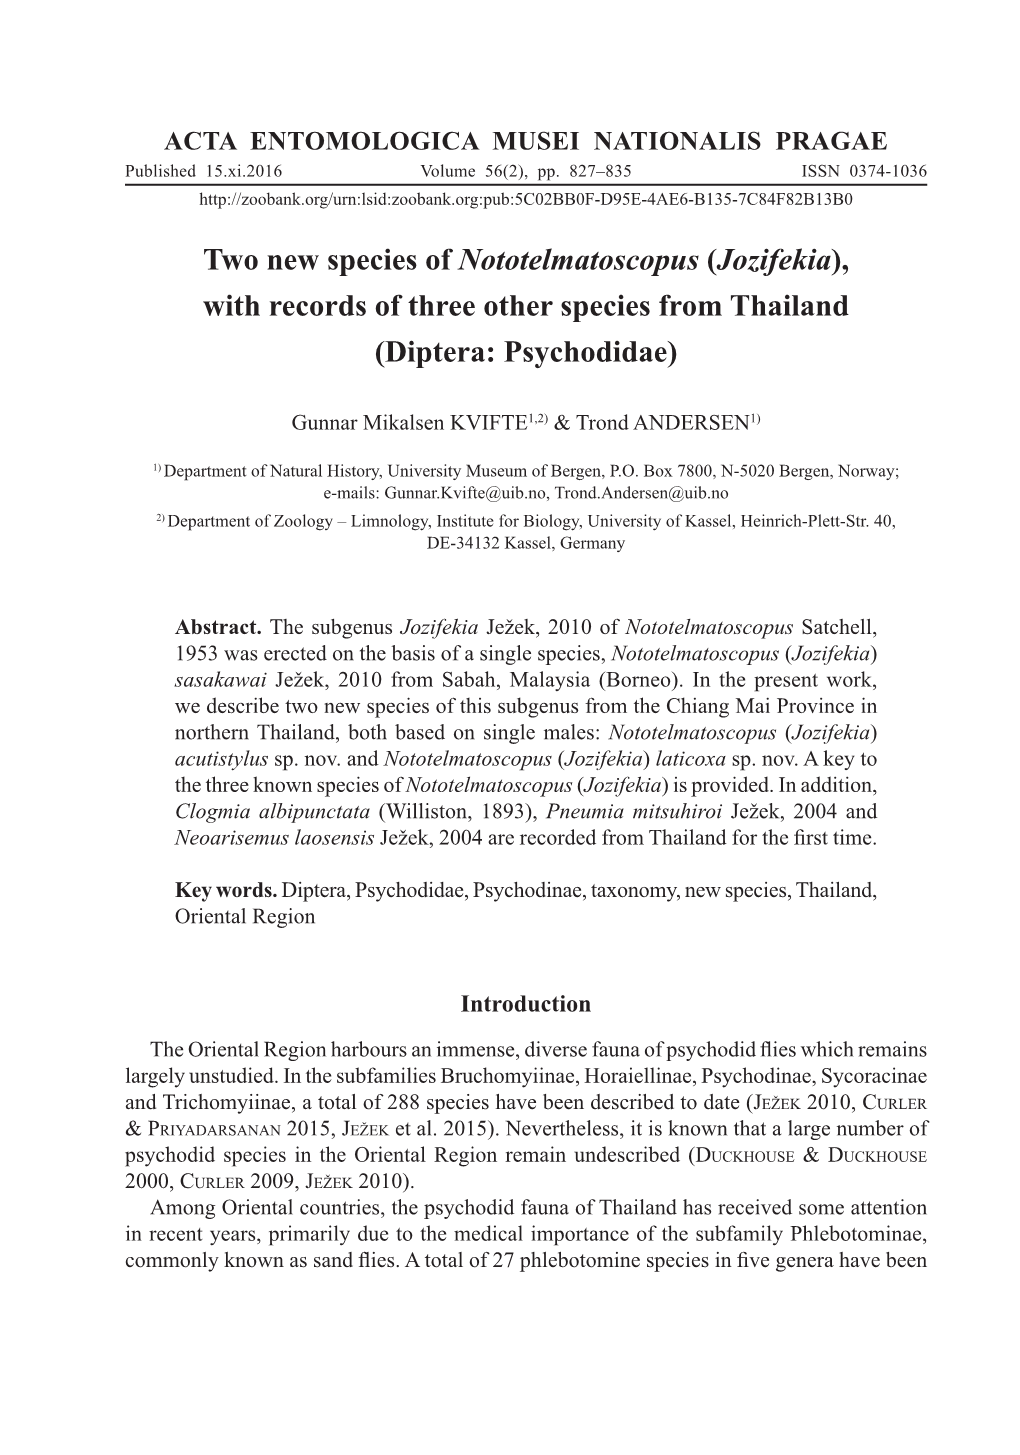 Two New Species of Nototelmatoscopus (Jozifekia), with Records of Three Other Species from Thailand (Diptera: Psychodidae)